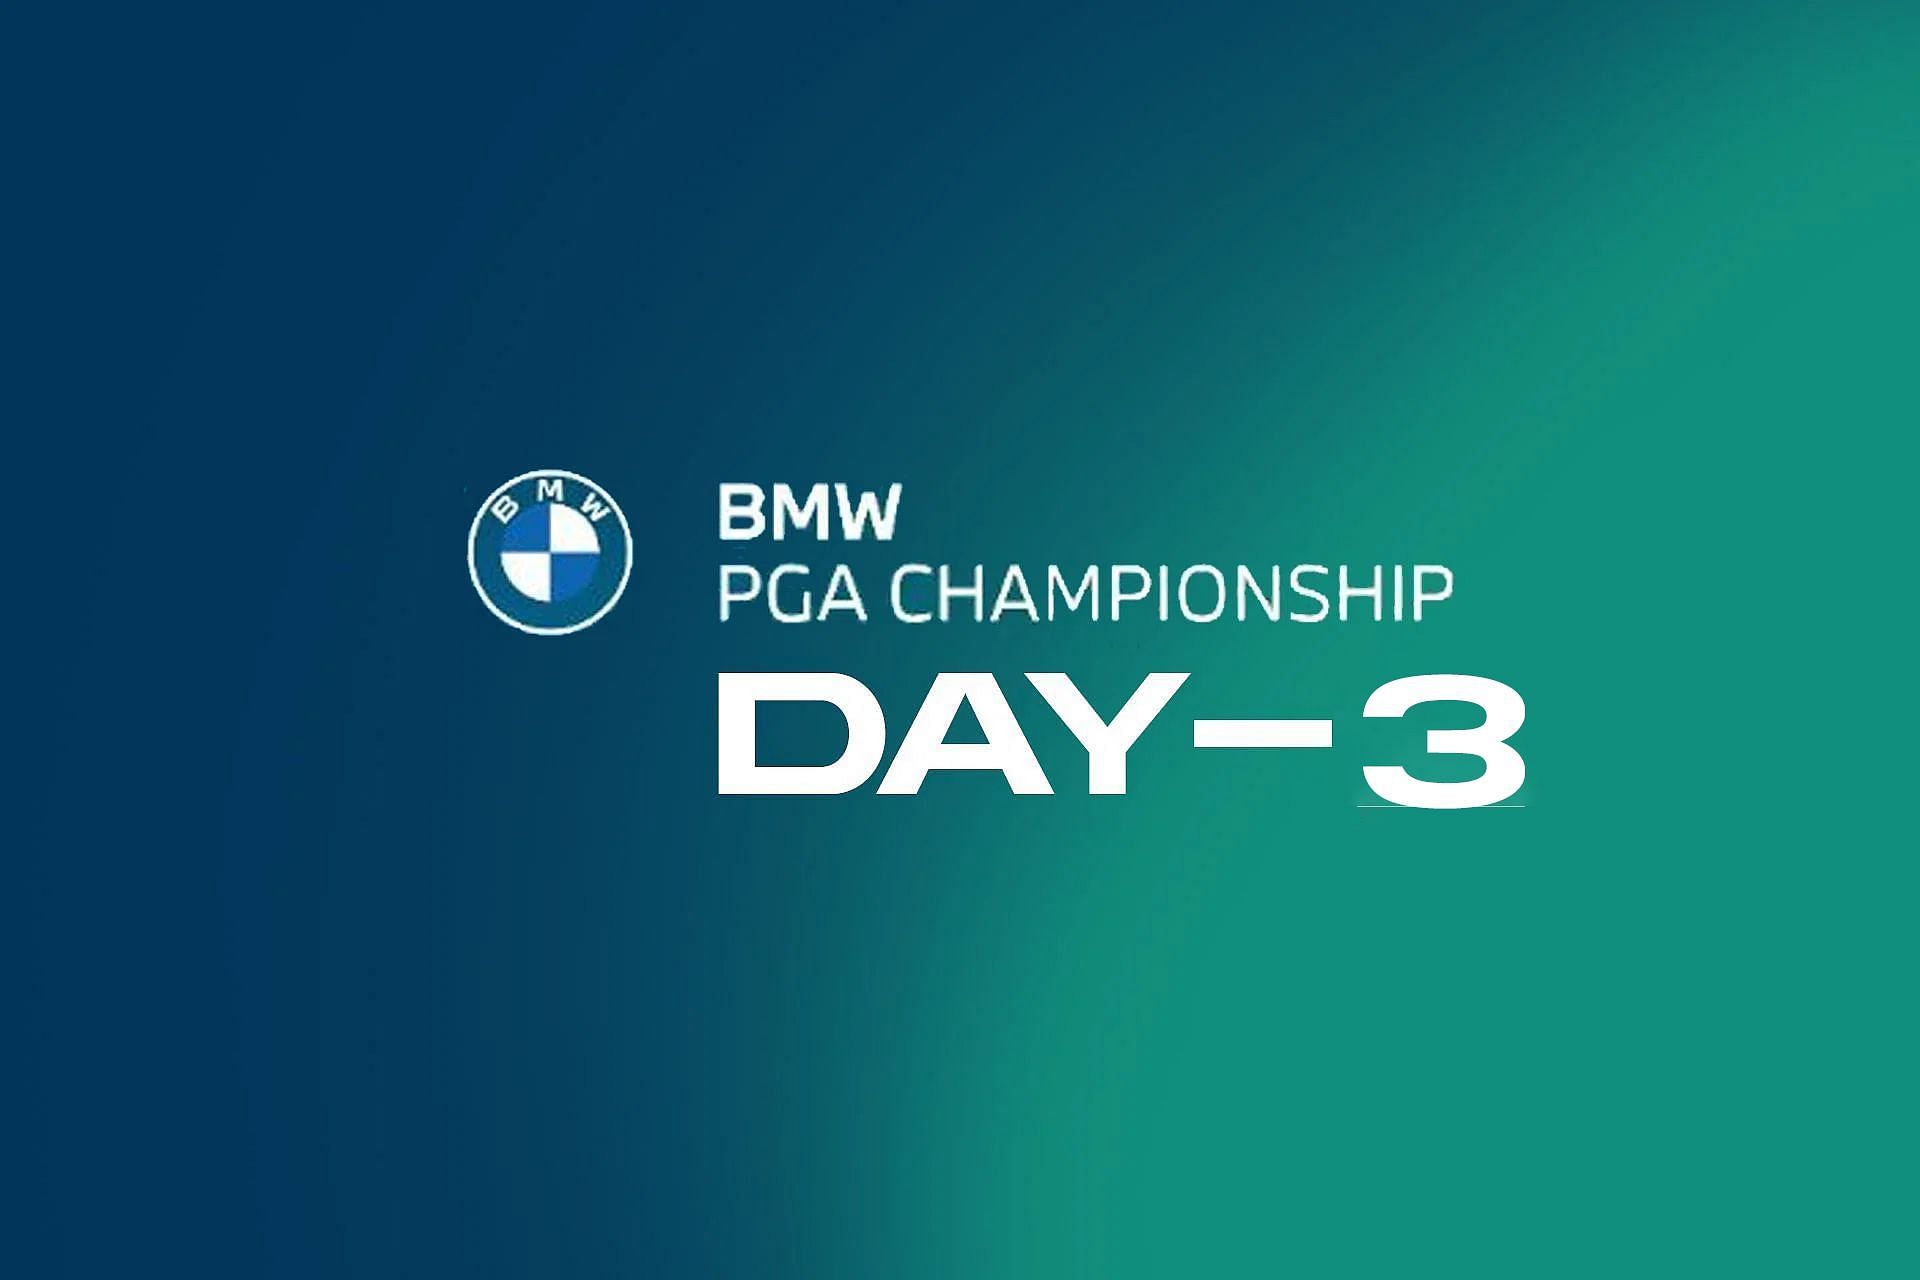 BMW PGA Championship 2022 Leaderboard after Day 3